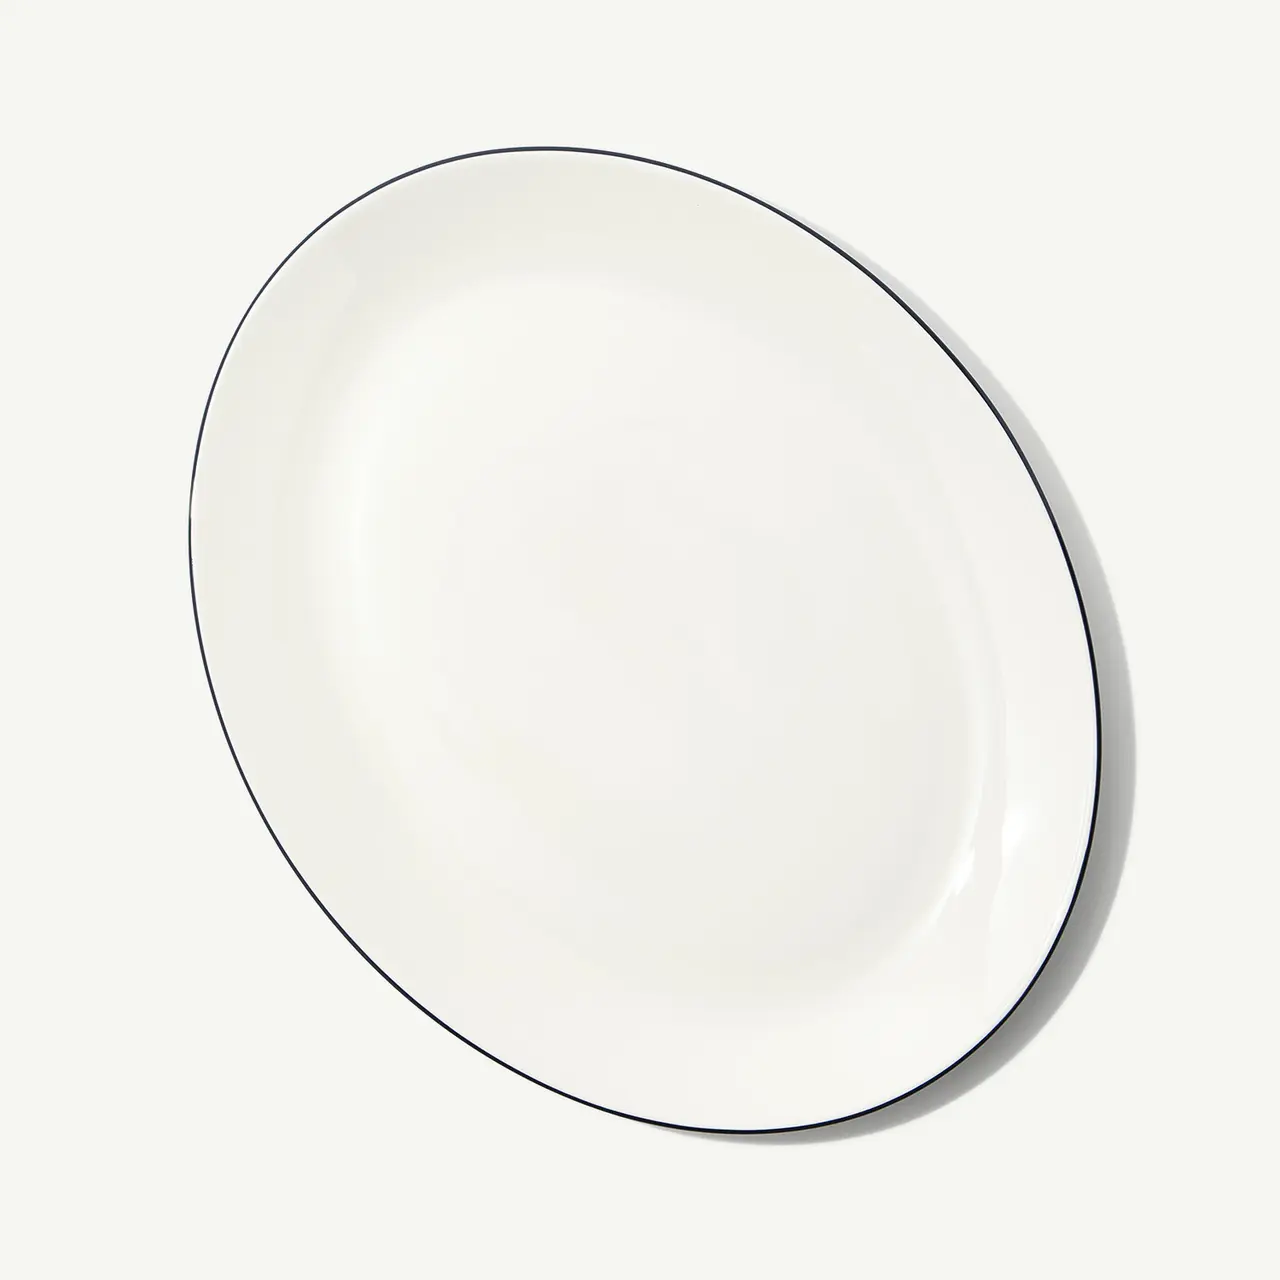 A plain white oval plate with a simple dark rim on a light background is displayed.